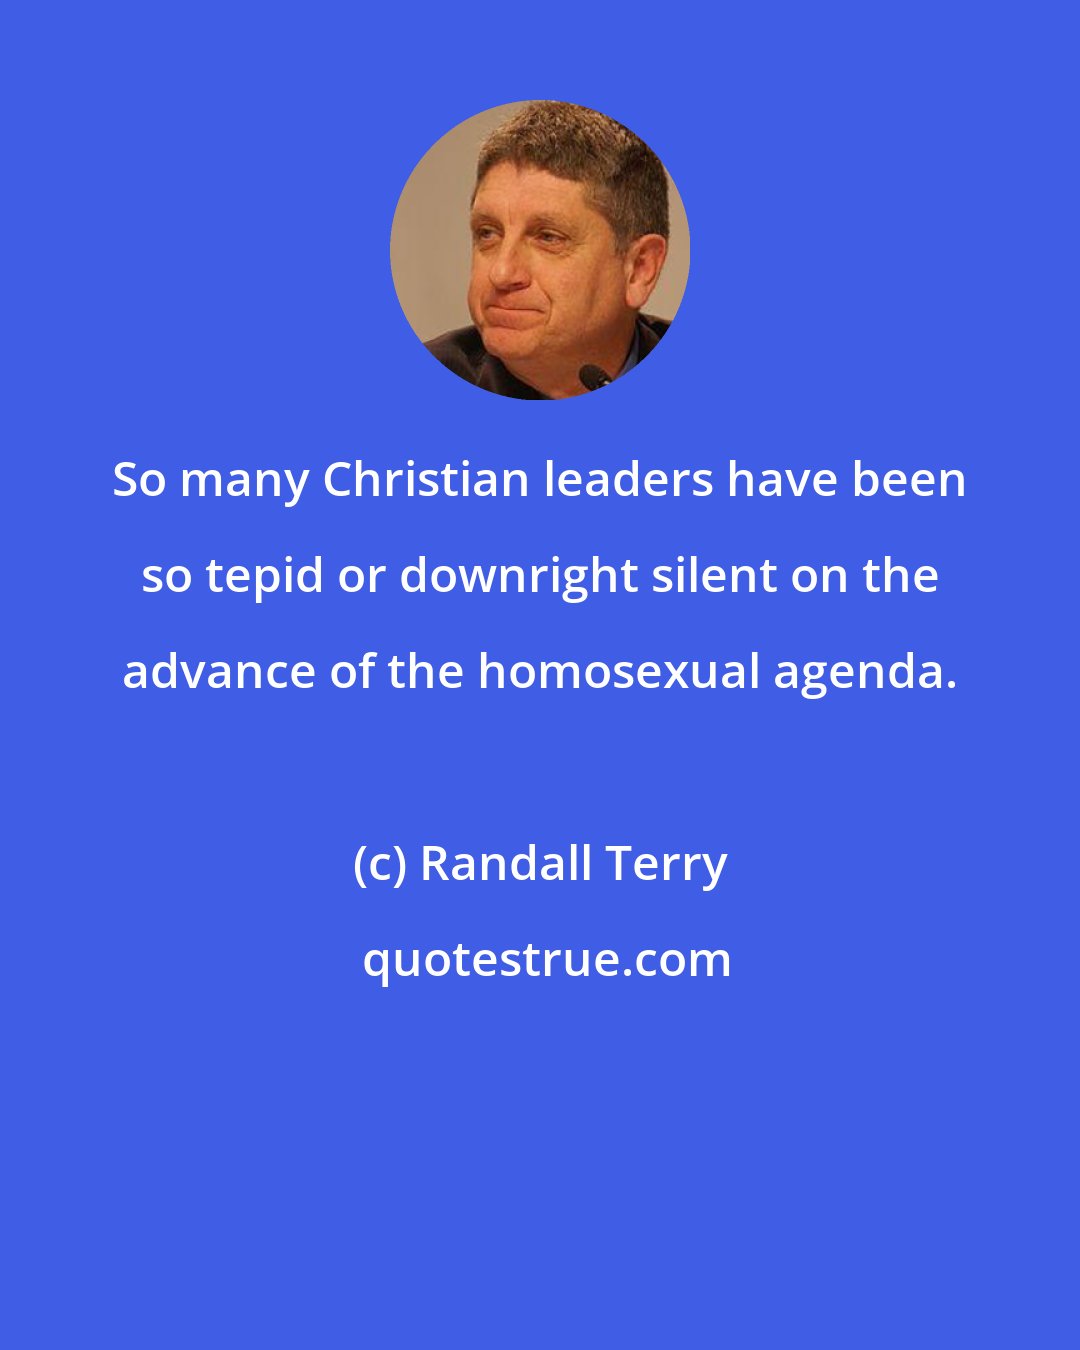 Randall Terry: So many Christian leaders have been so tepid or downright silent on the advance of the homosexual agenda.